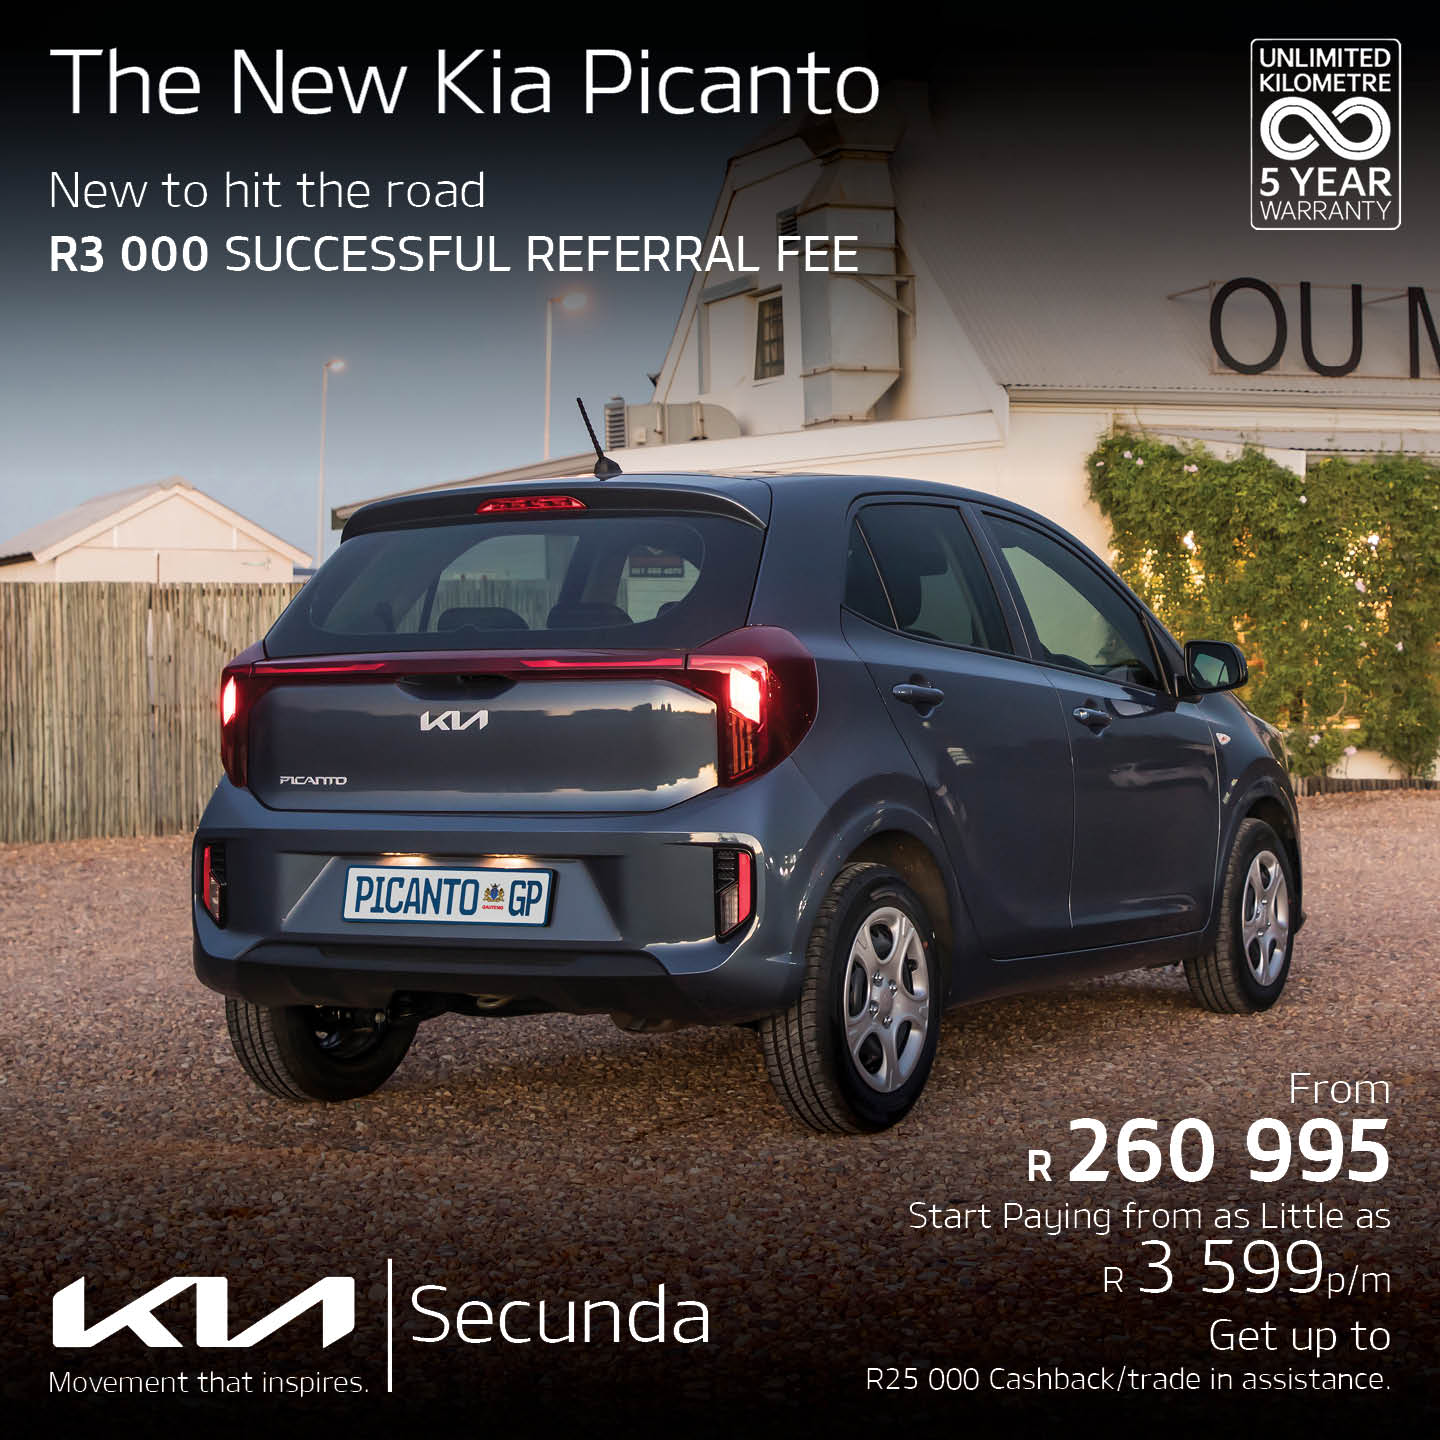 NEW to hit the road -The new KIA Picanto image from 